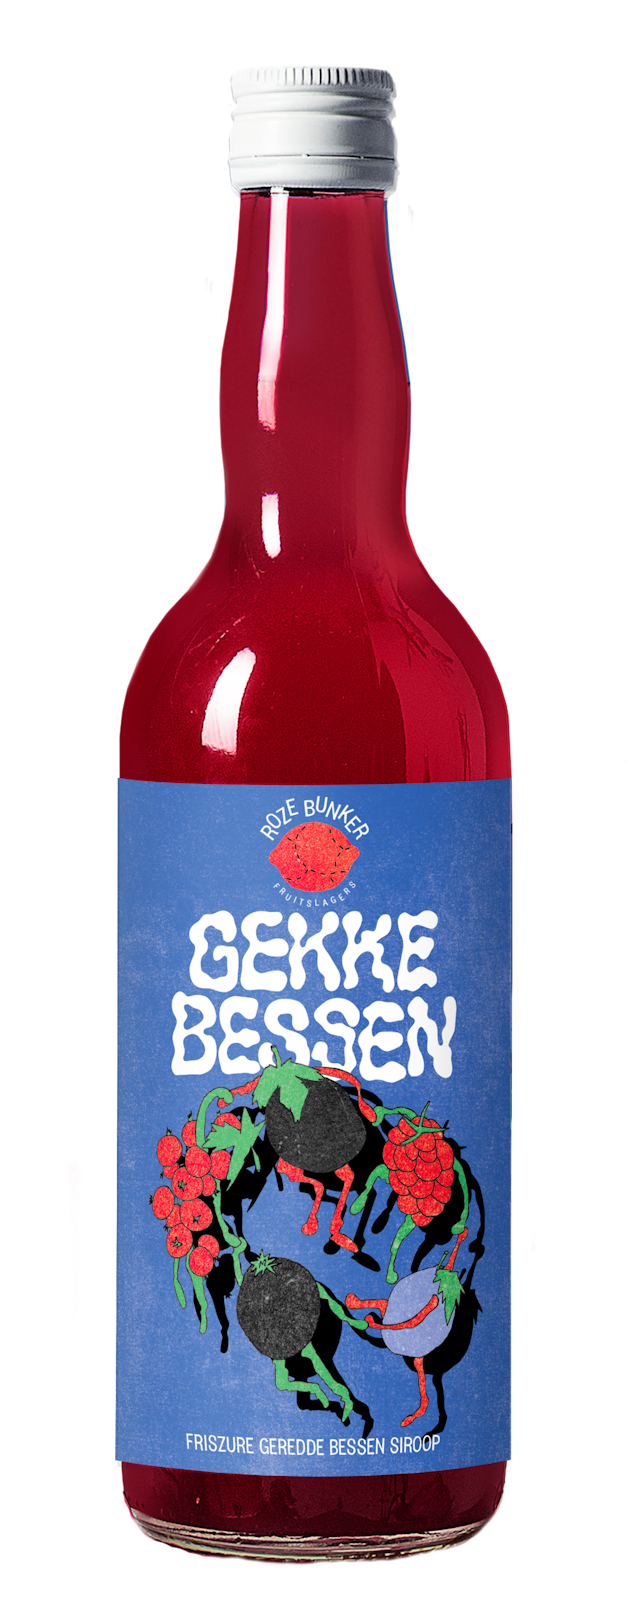 Bottle of Crazy Berry syrup by Roze Bunker